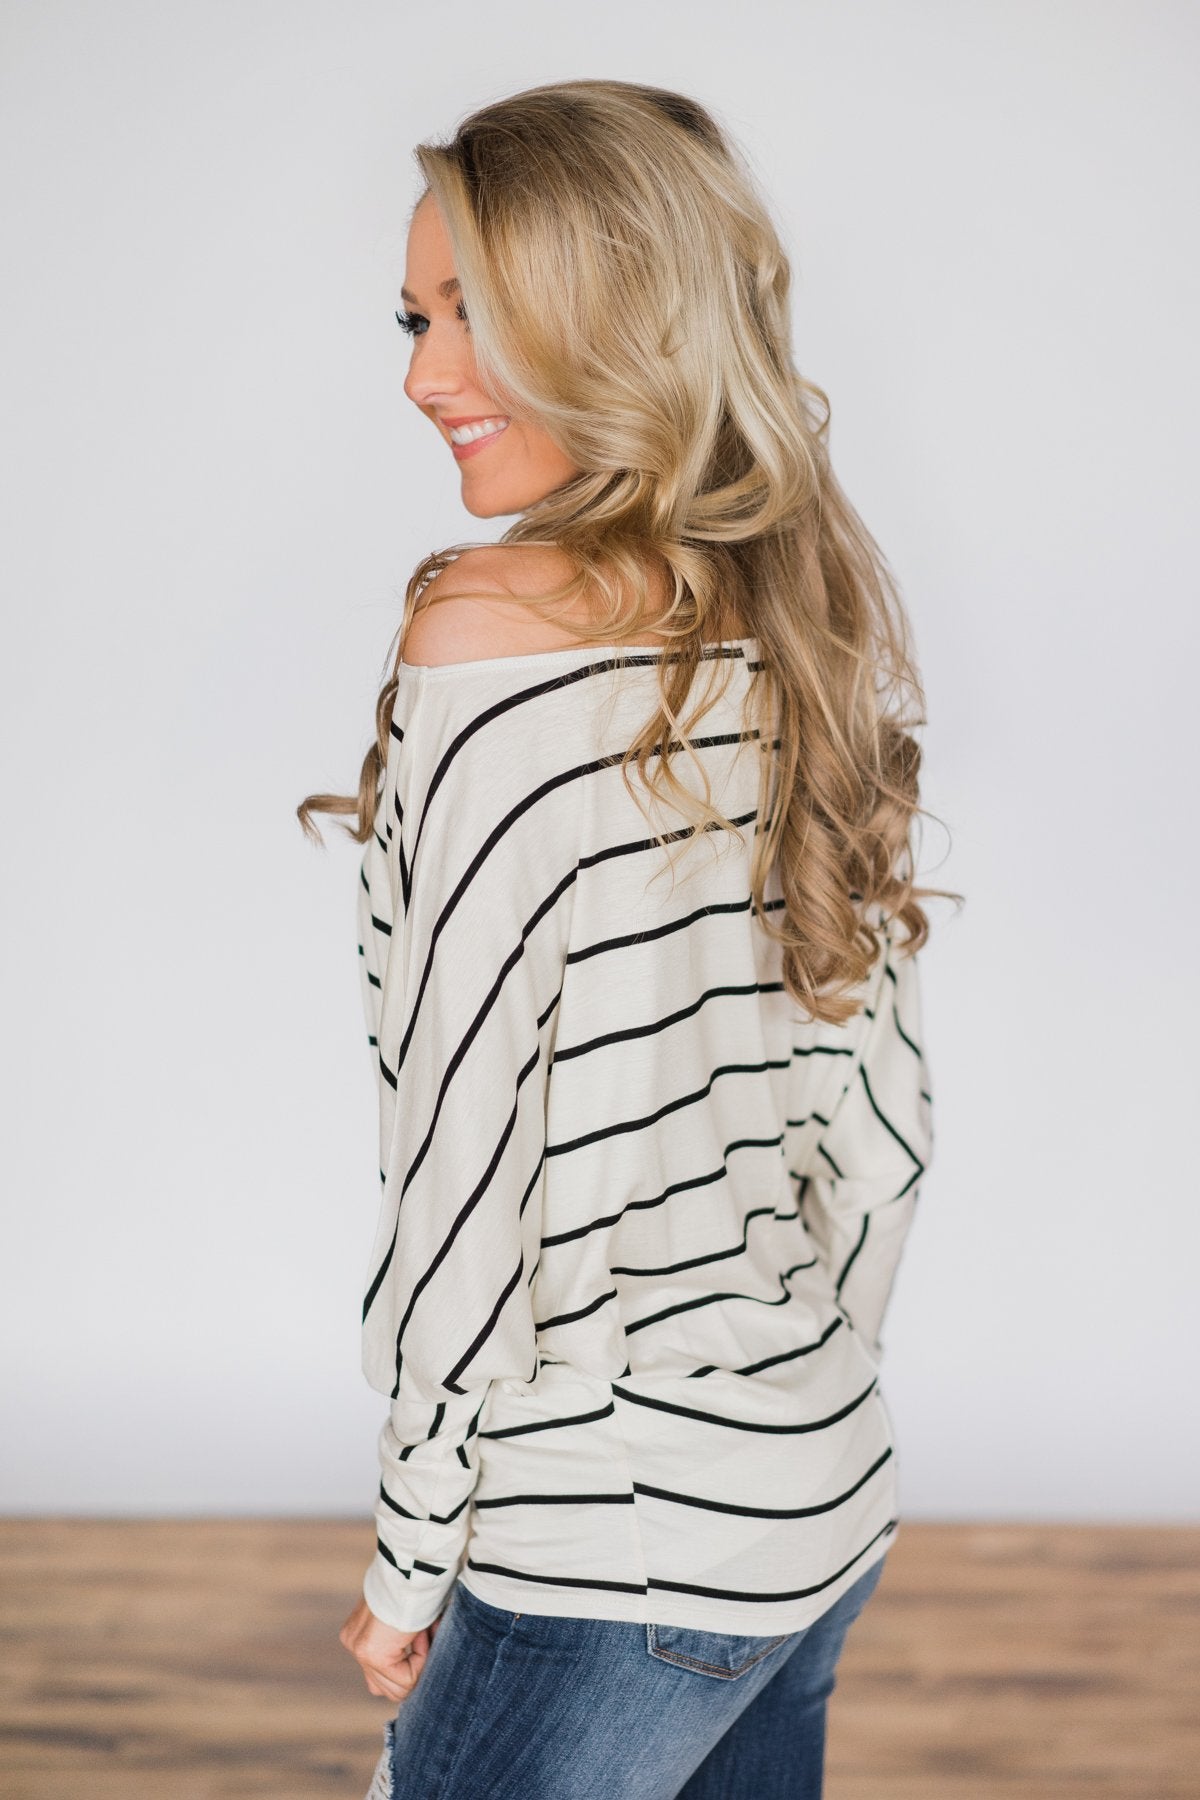 Captivated by Love Striped Top ~ White